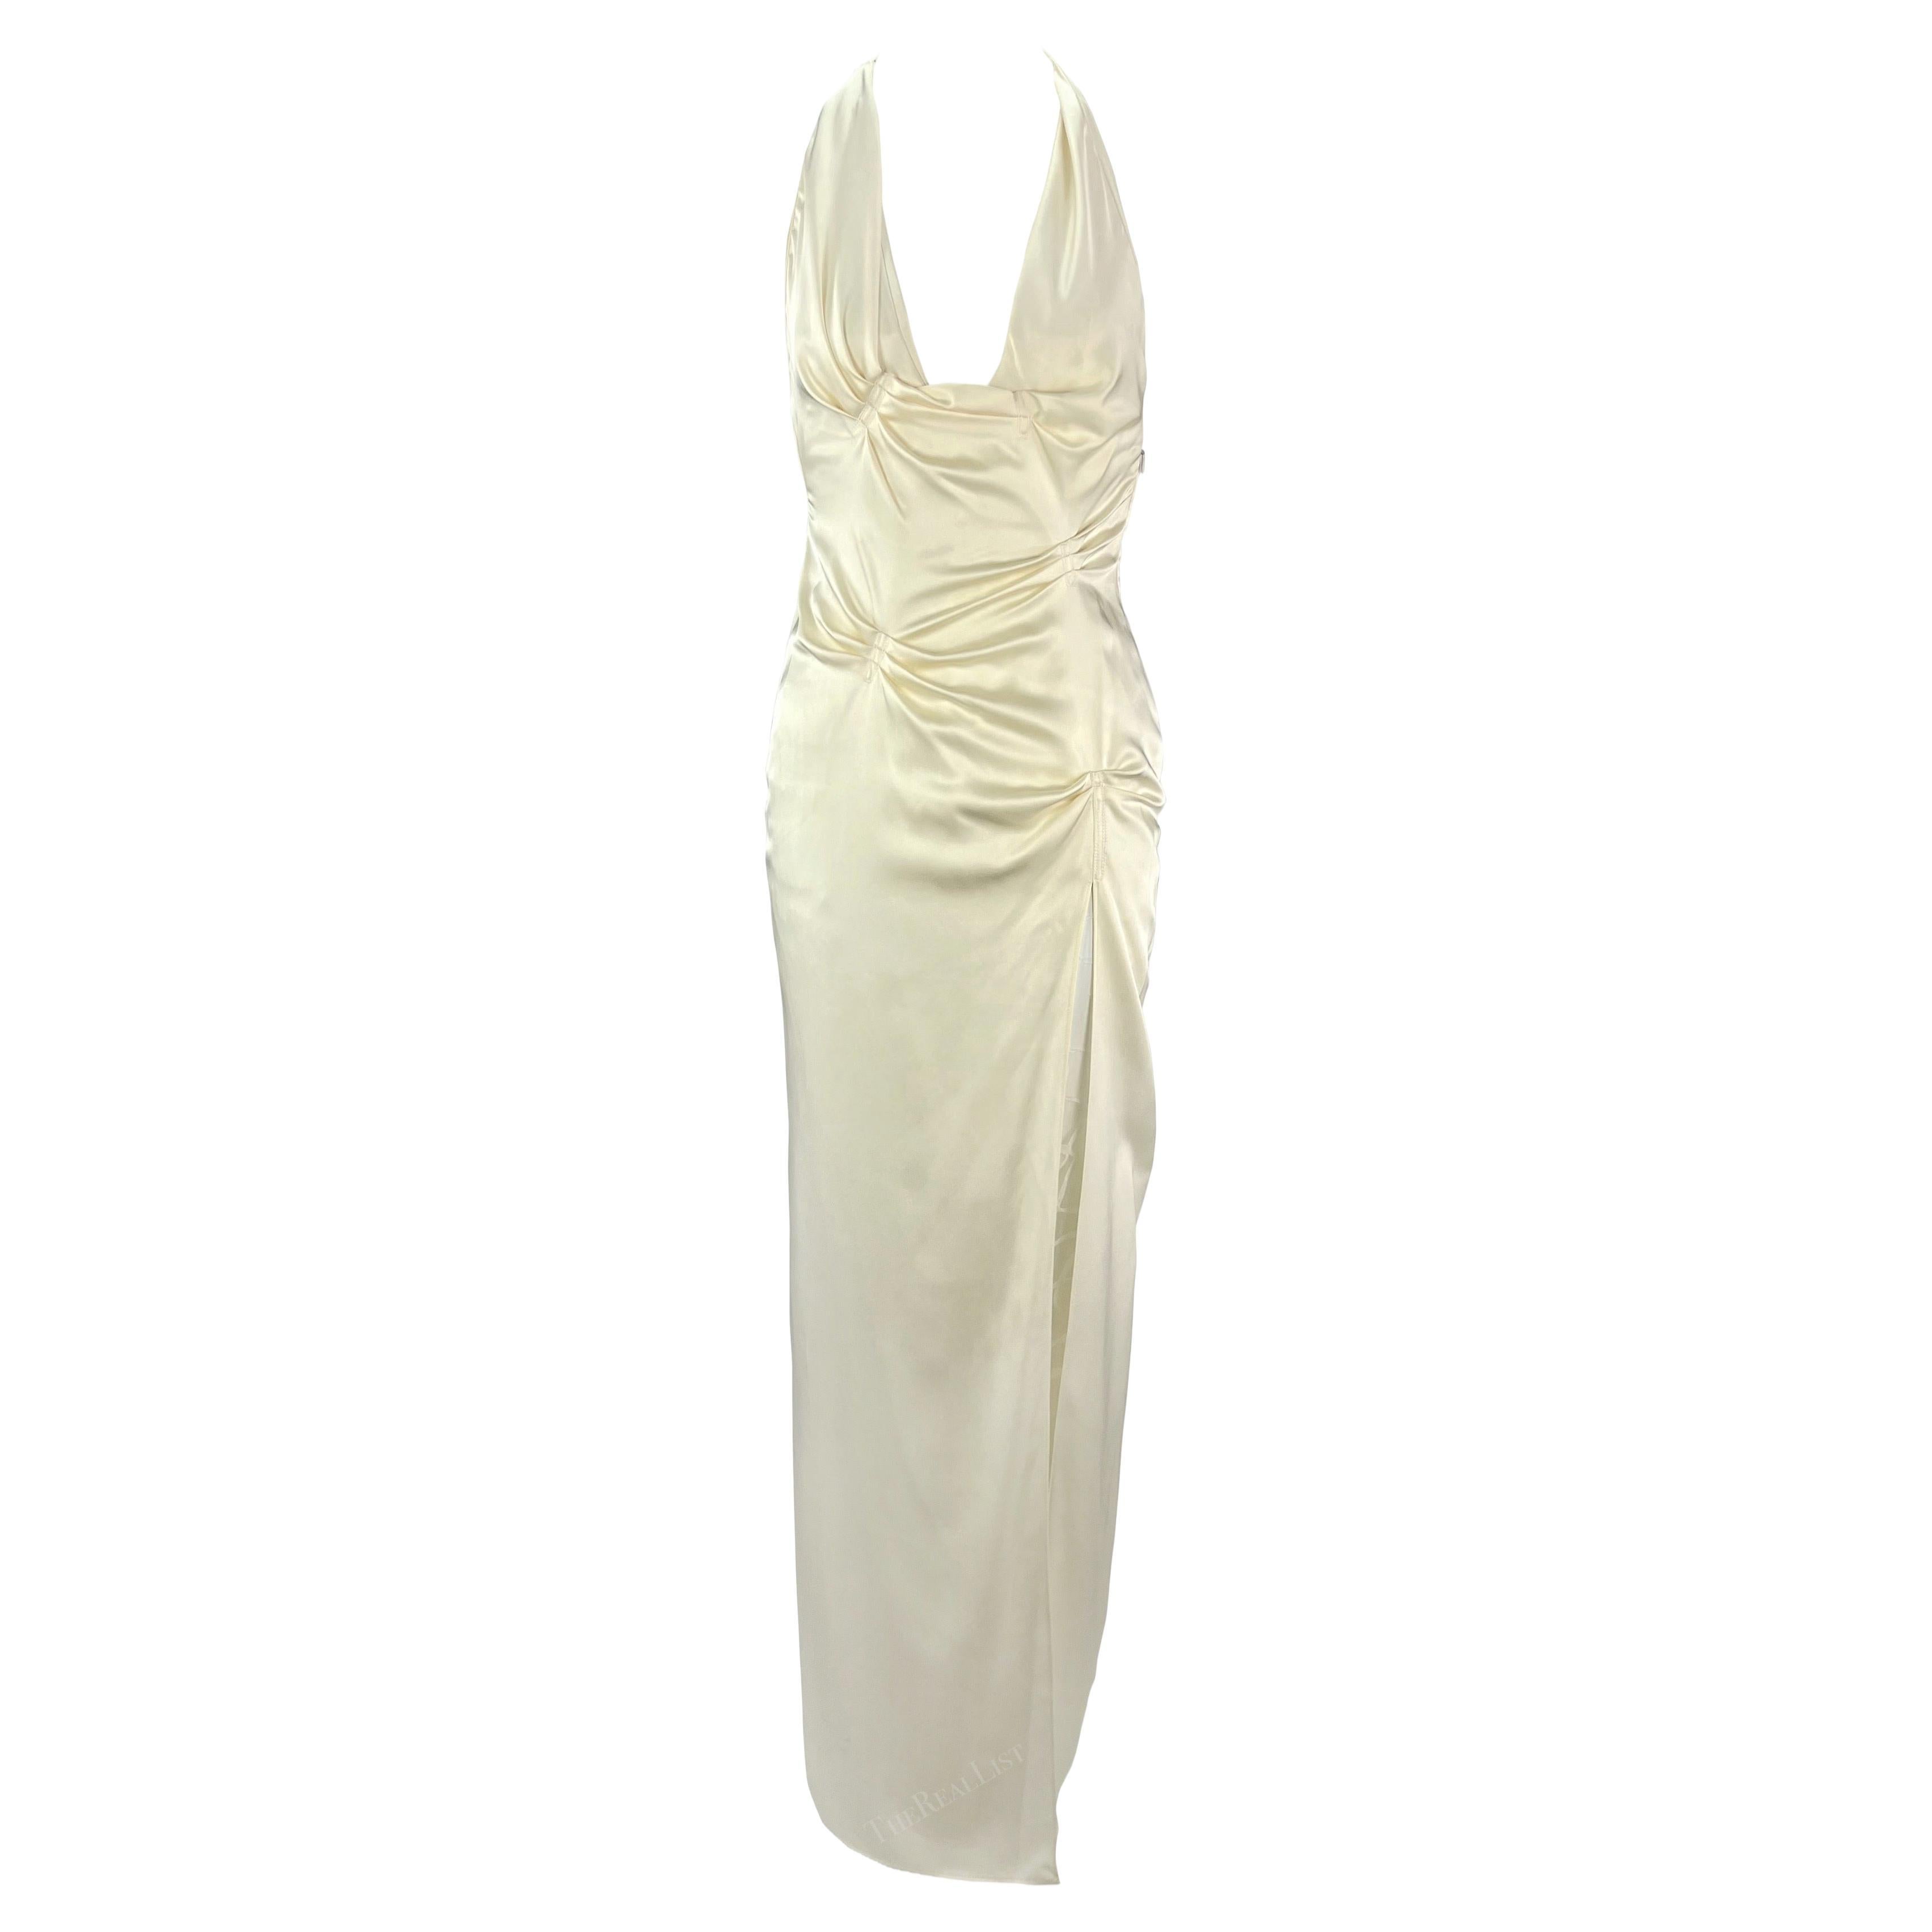 S/S 1999 Gianni Versace by Donatella Ruched Off-White High-Slit Backless Gown